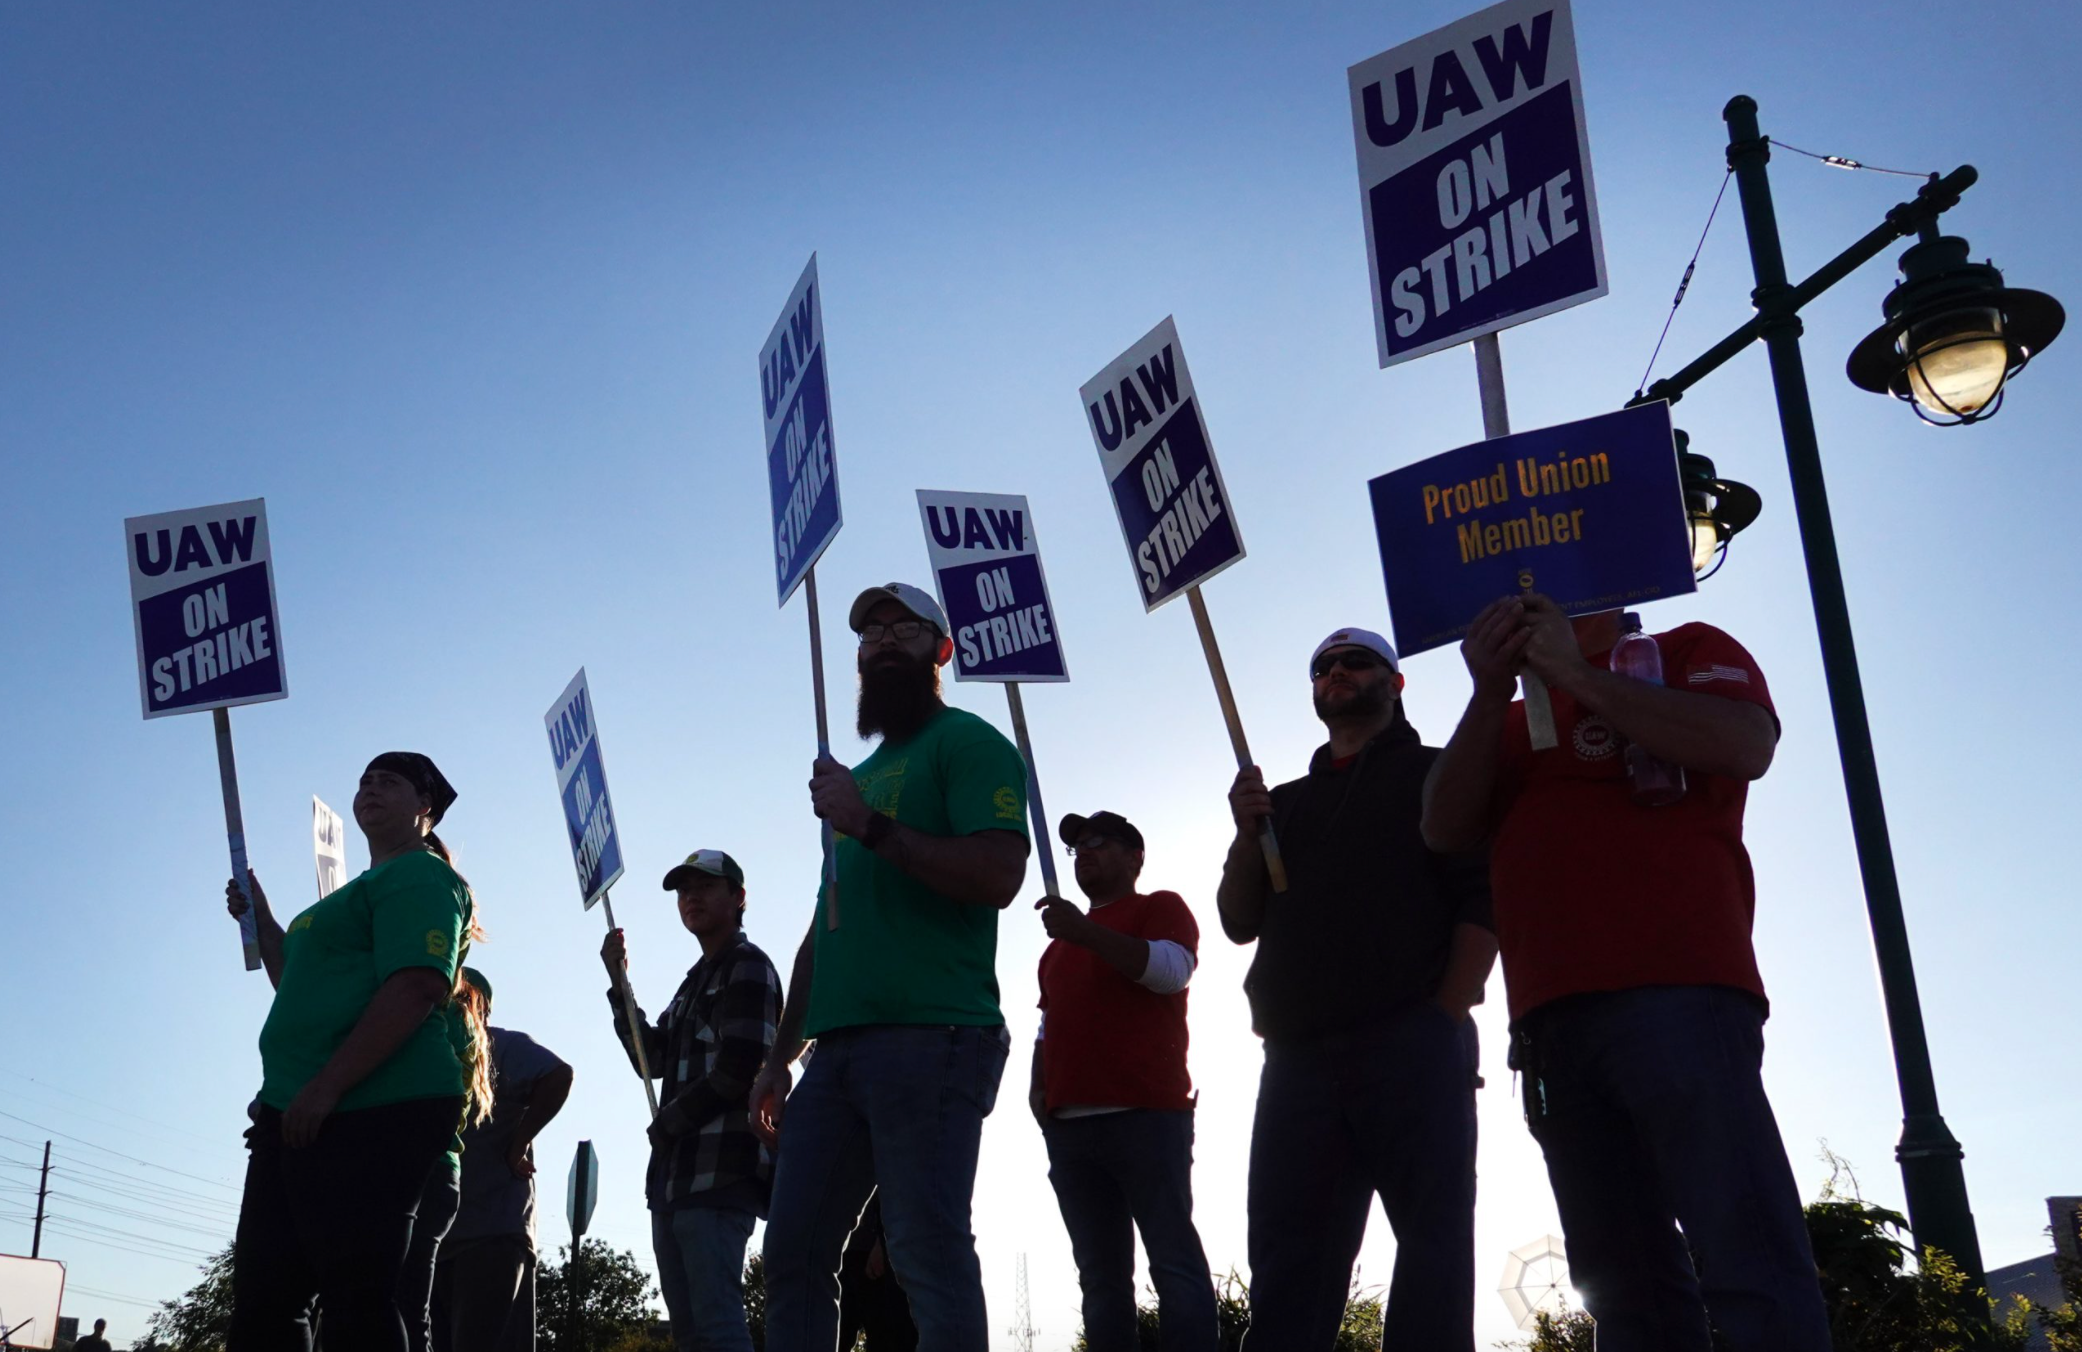 What Could This Moment of Labor Strife Become if Workers Get More Organized?